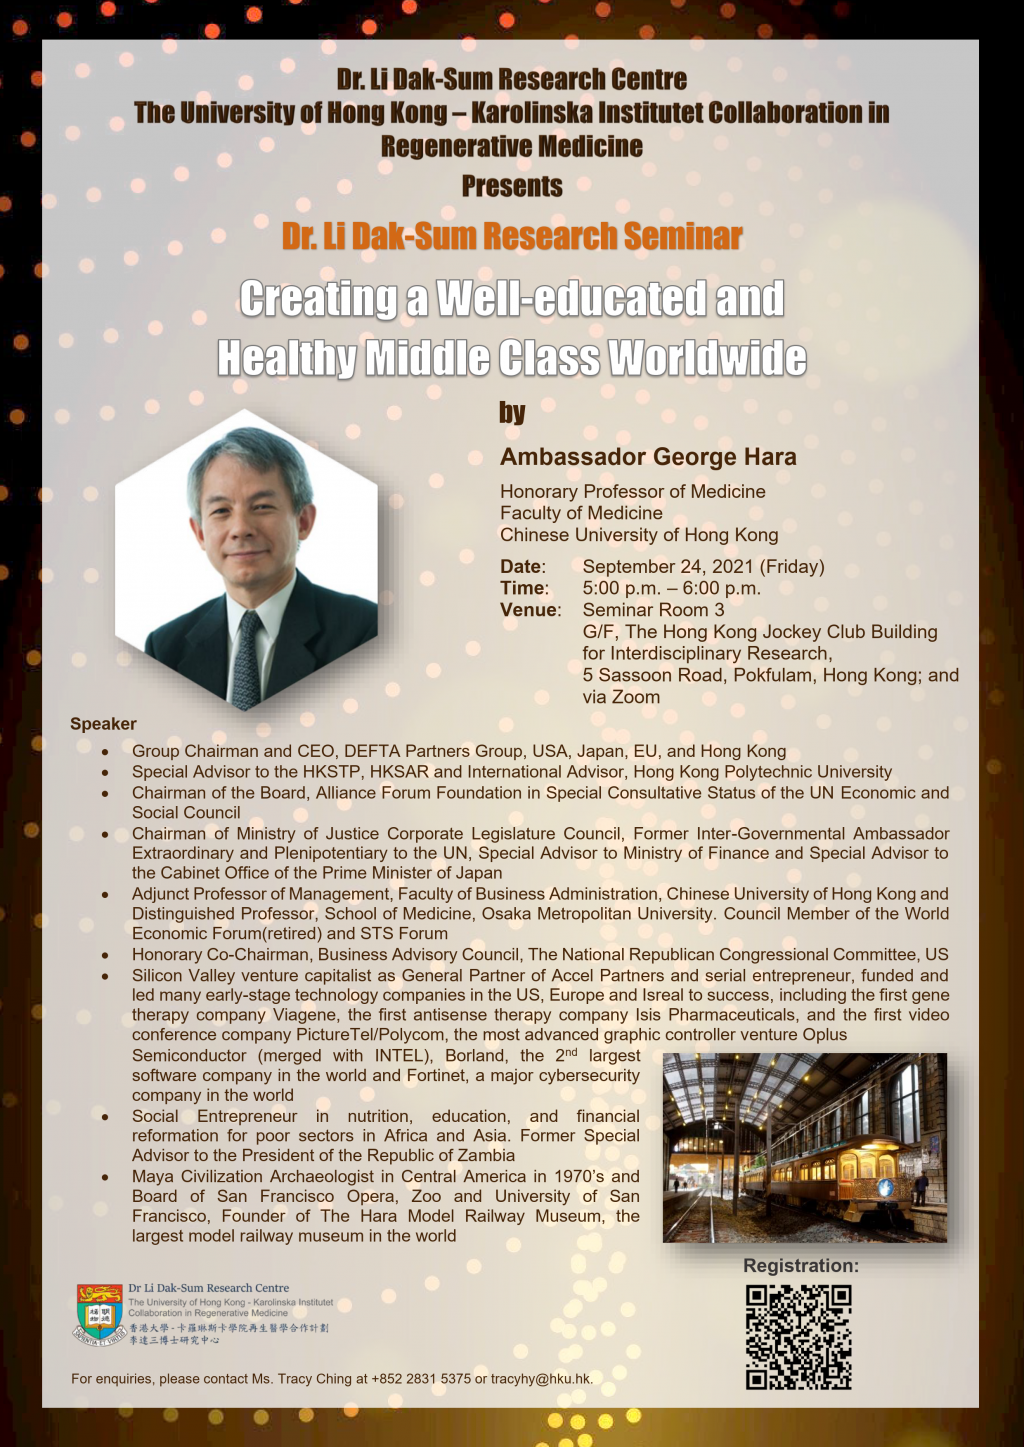 [Dr. Li Dak-Sum Research Seminar] Creating a Well-educated and Healthy Middle Class Worldwide by Ambassador George Hara